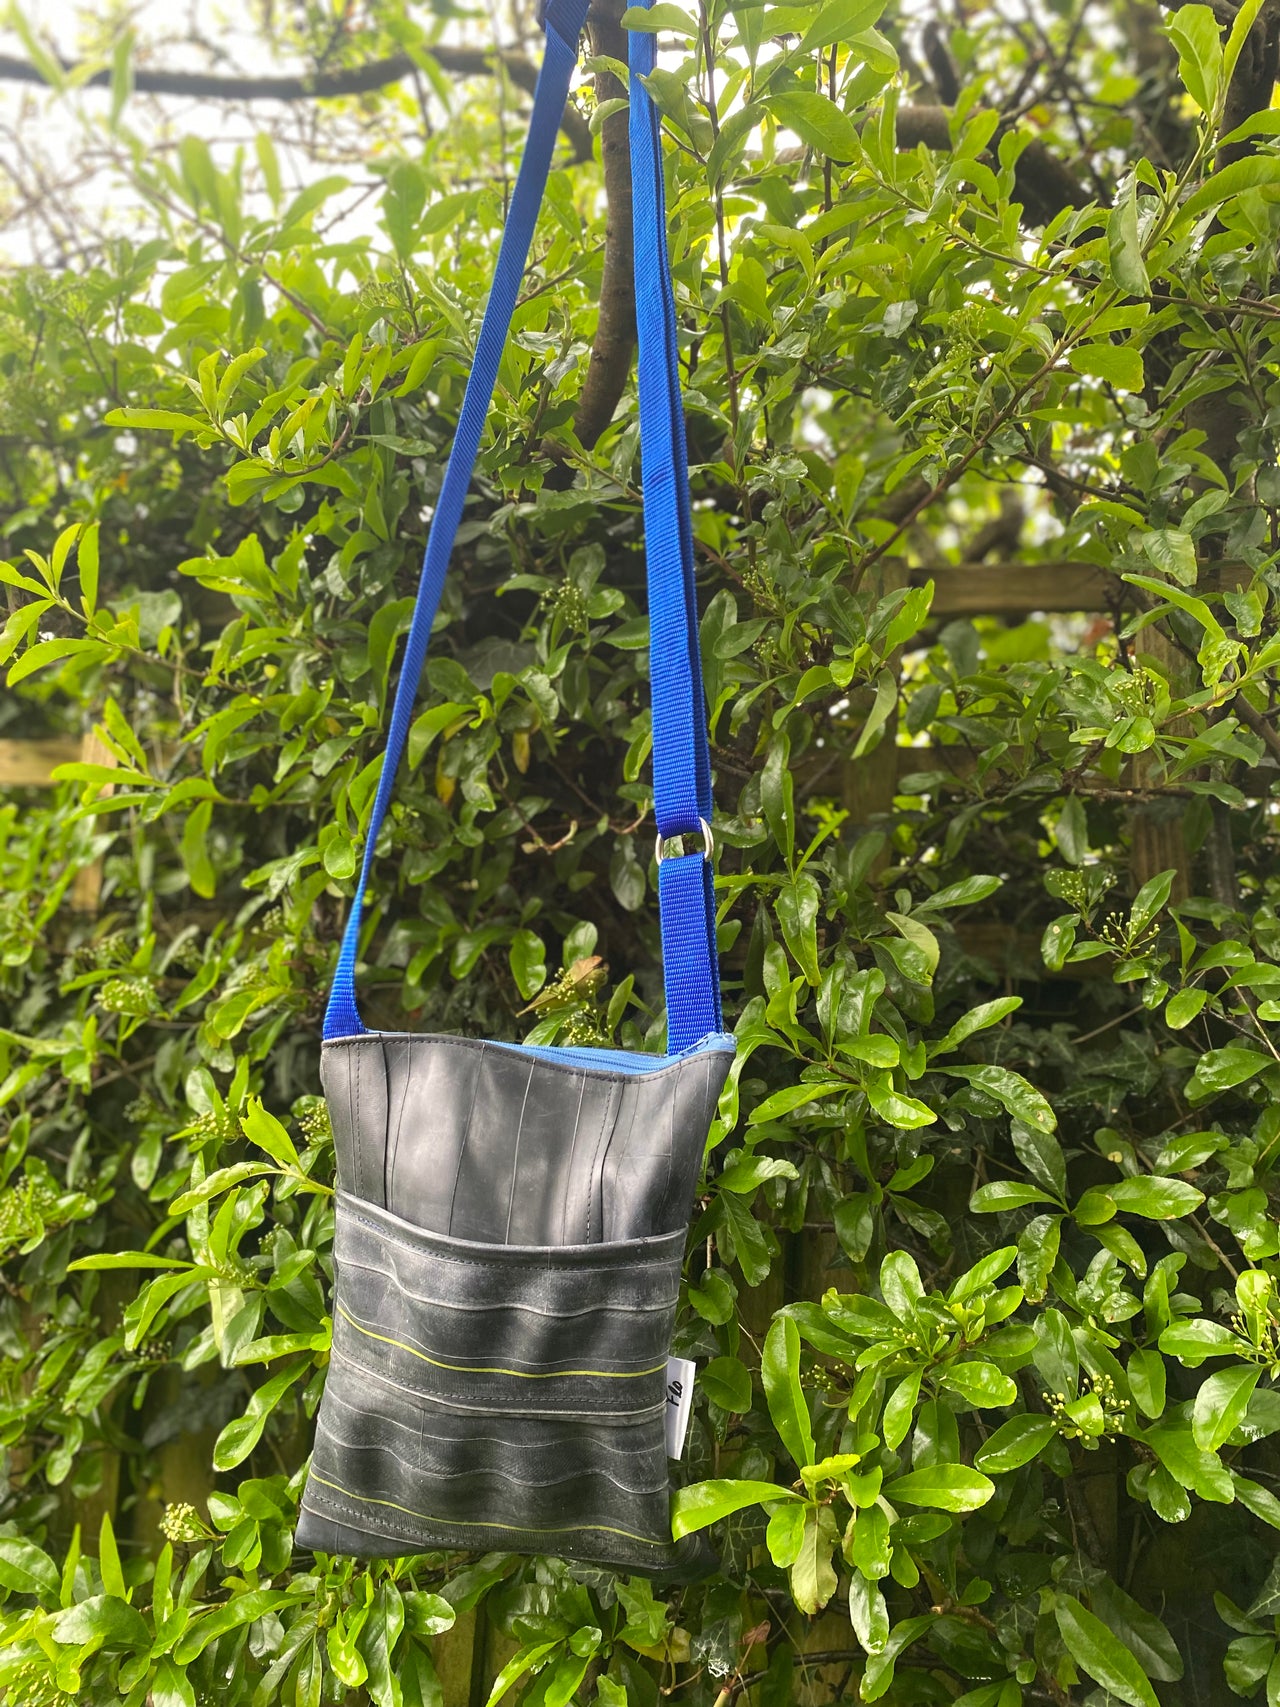 I used to be a Punctured Inner Tube - Cross body Bag